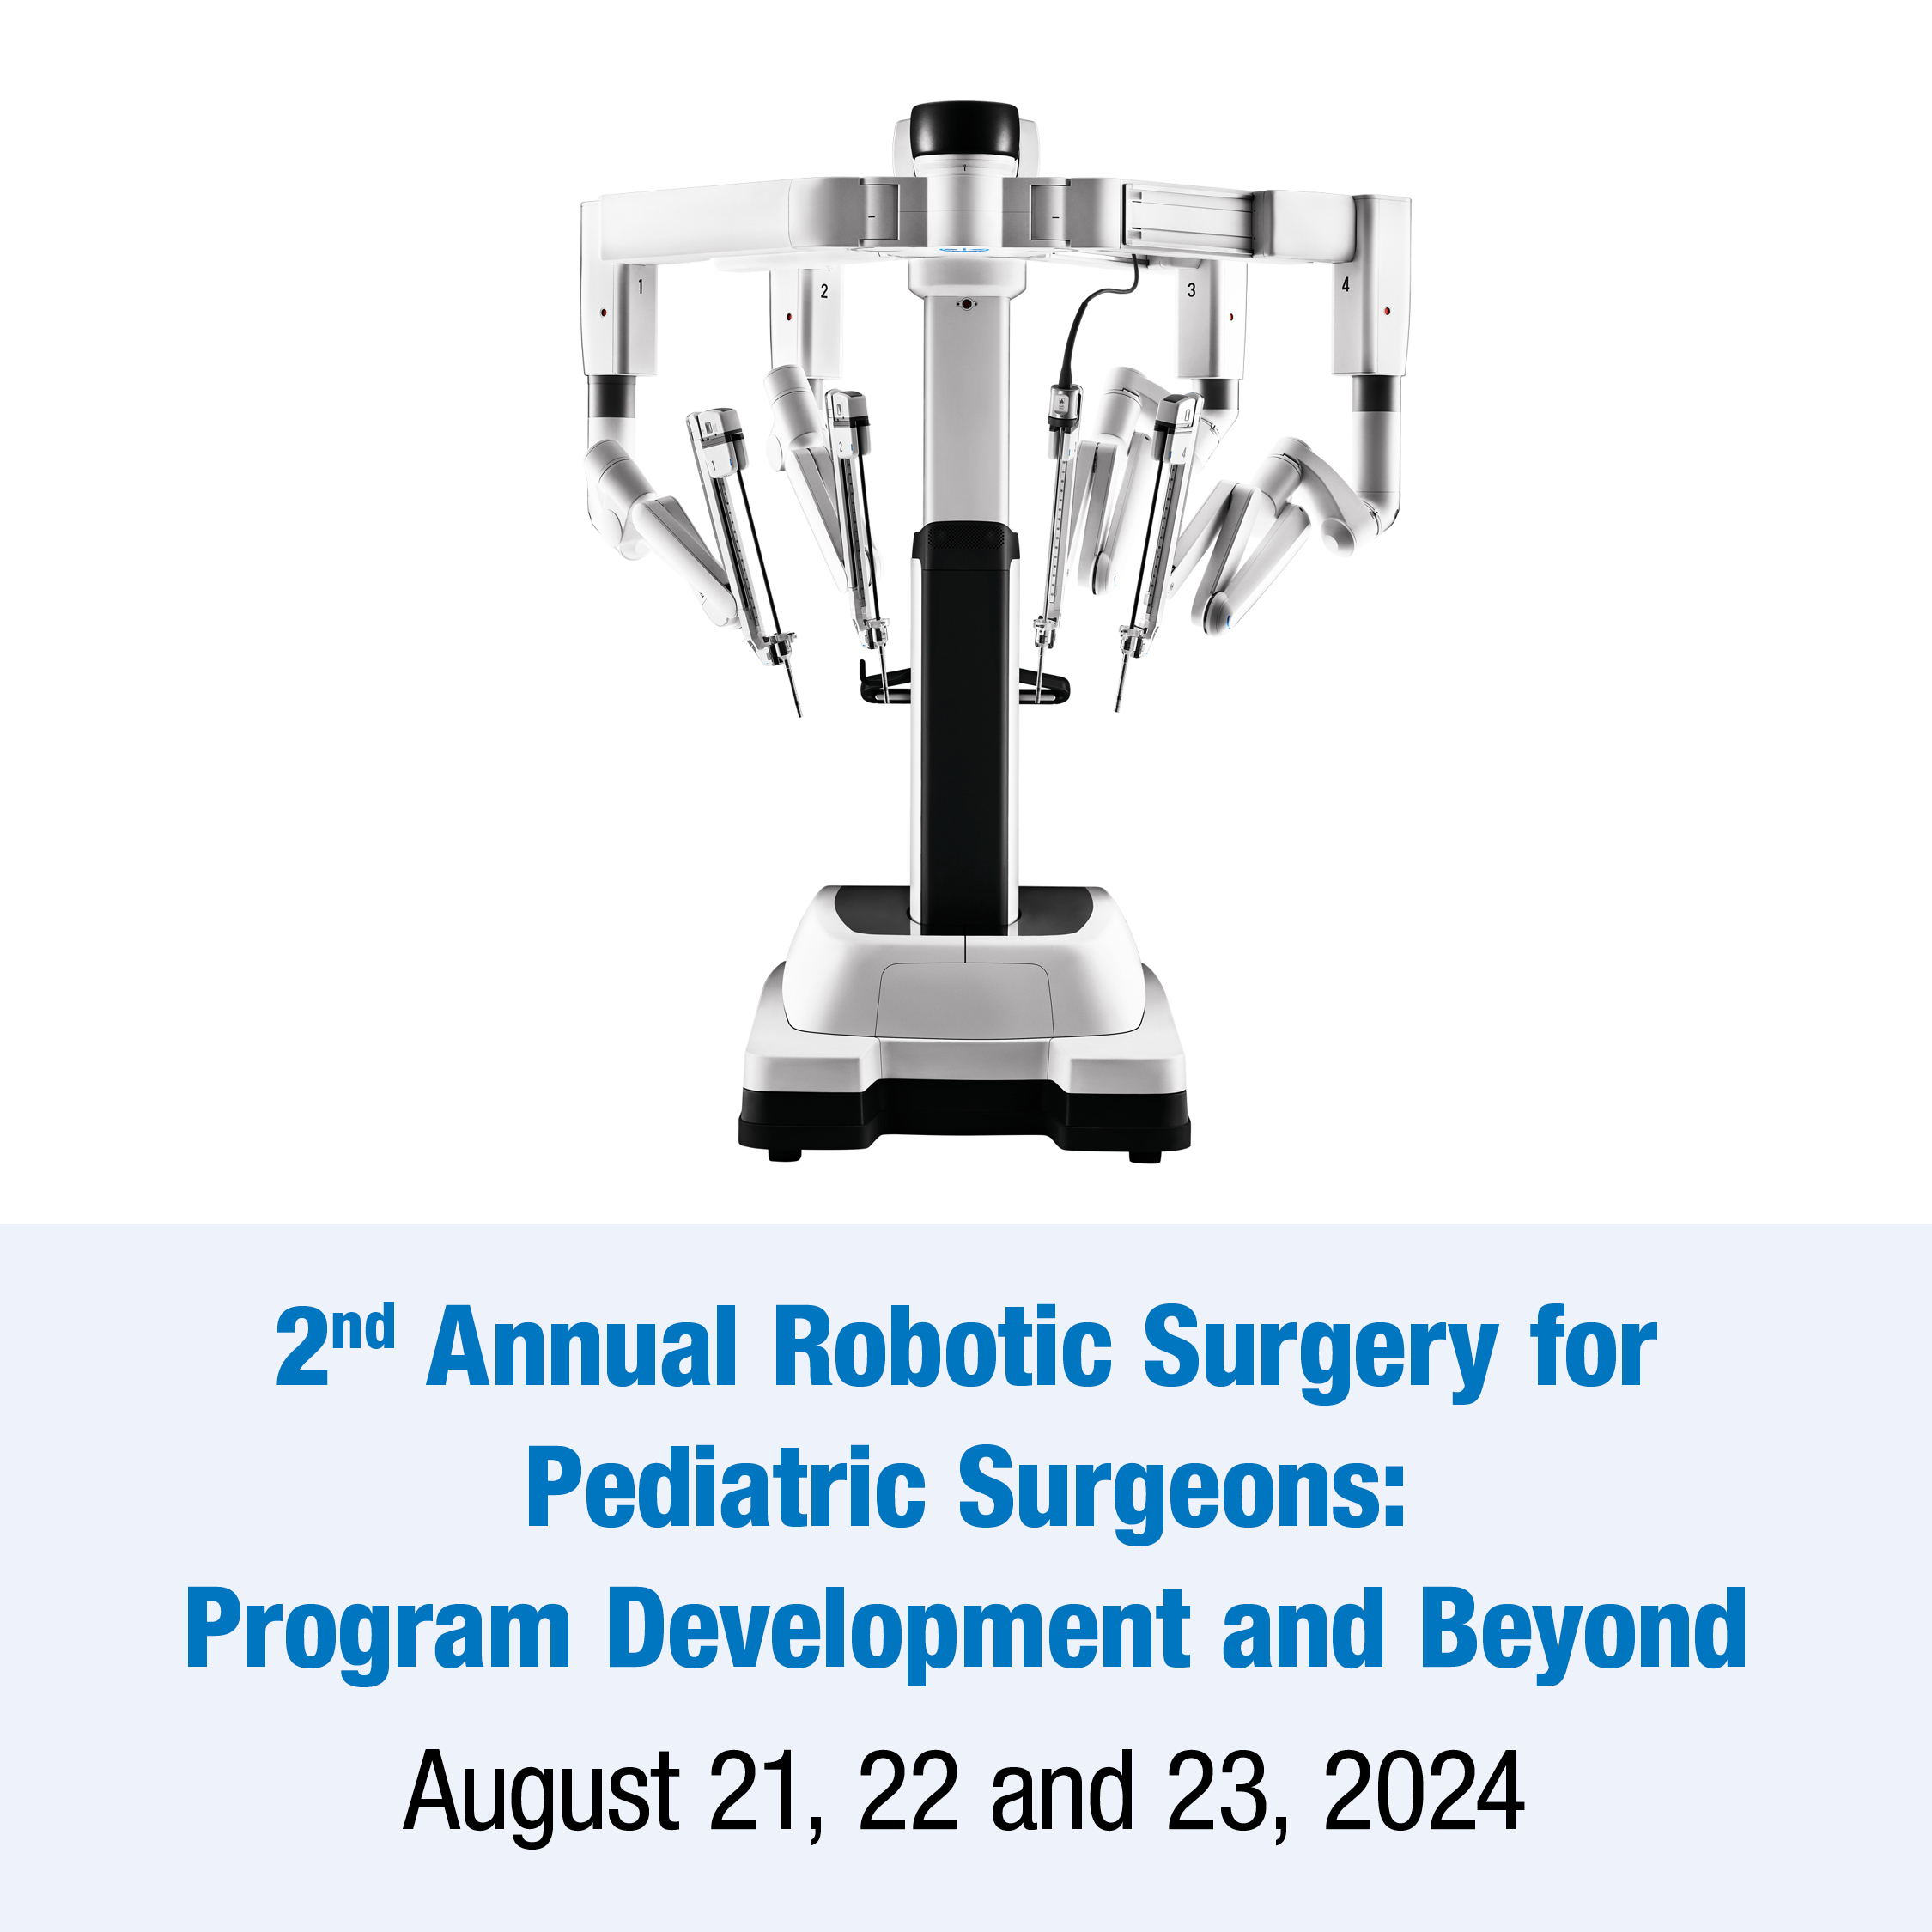 2nd Annual Robotic Surgery for Pediatric Surgeons: Program Development and Beyond Banner